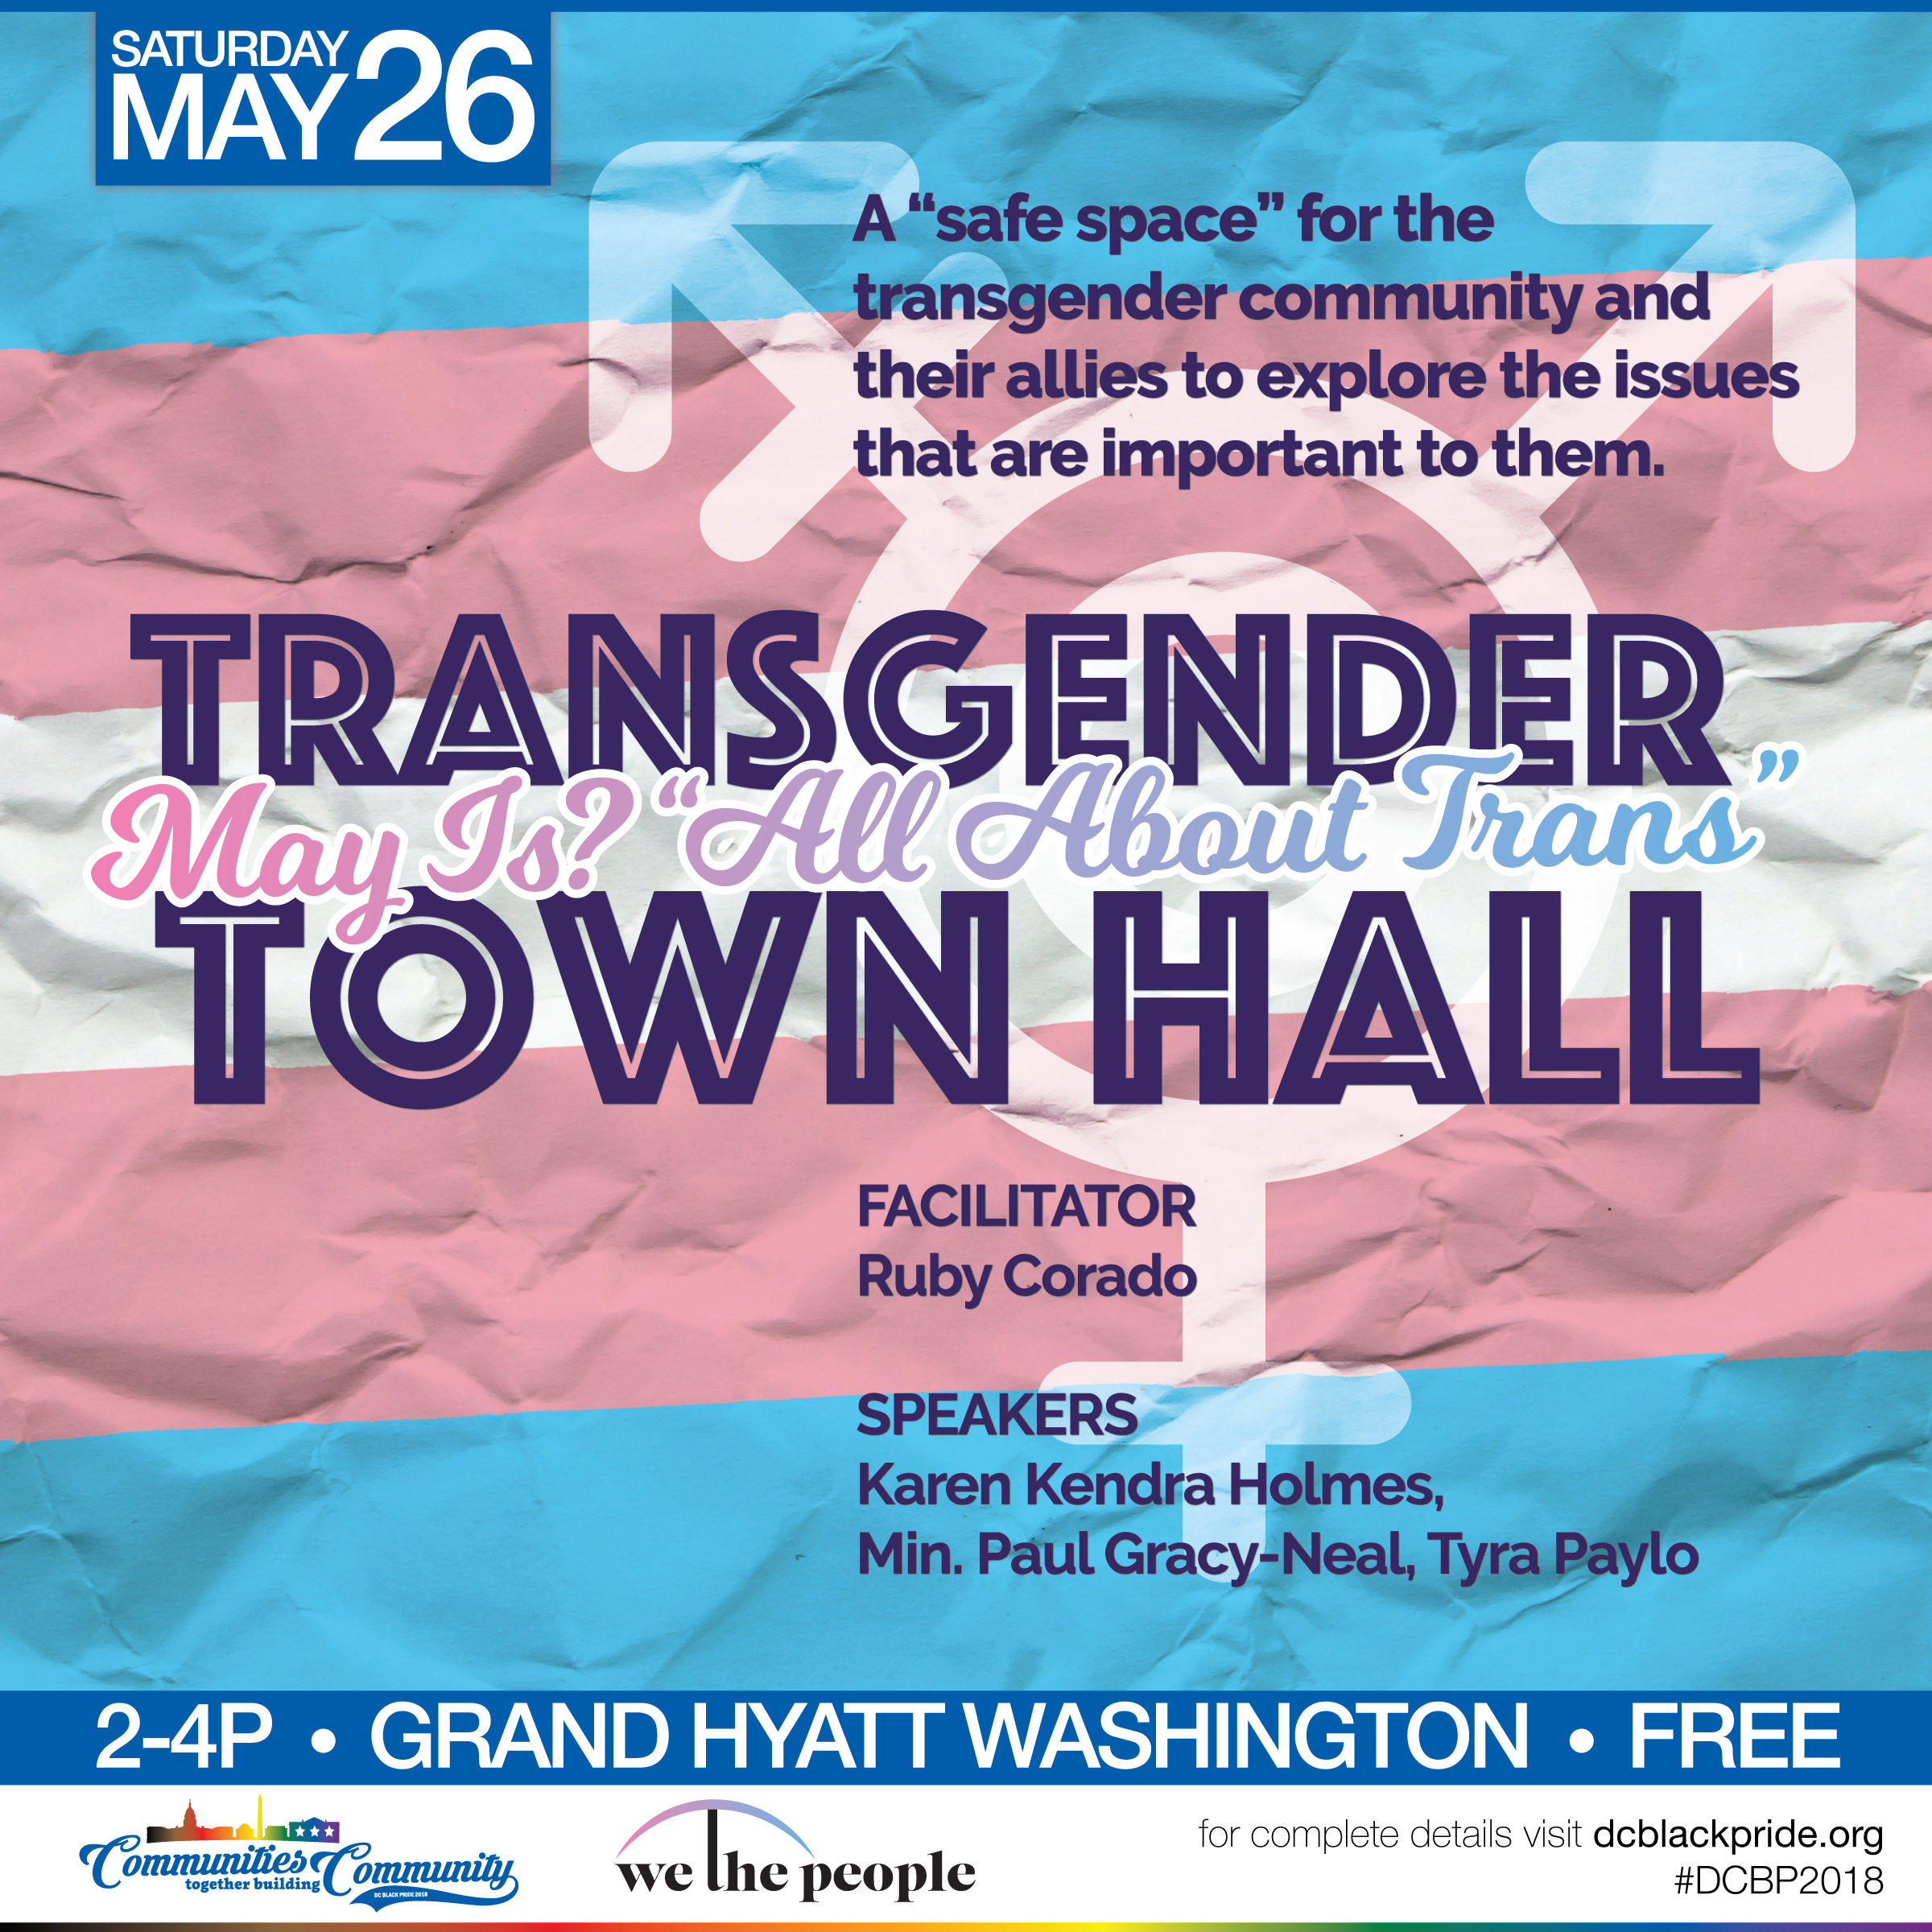 Transgender Town Hall - May is? “All About Trans”